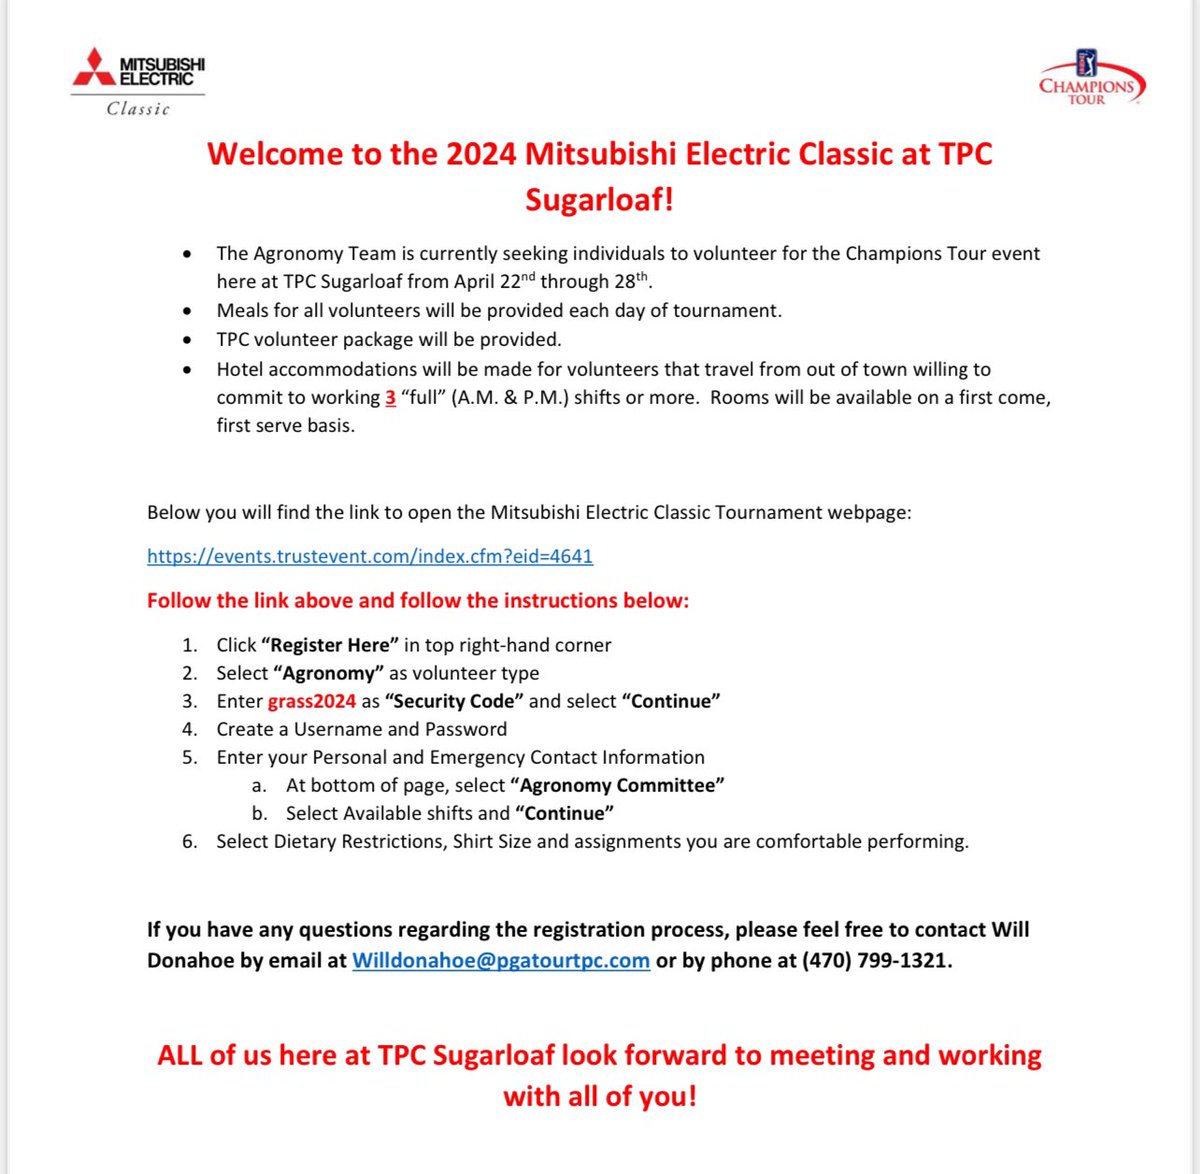 Registration is open to volunteer with the Agronomy Team at TPC Sugarloaf for the 2024 Mitsubishi Electric Classic! See below for details on how to register! #MEClassic #Agronomy